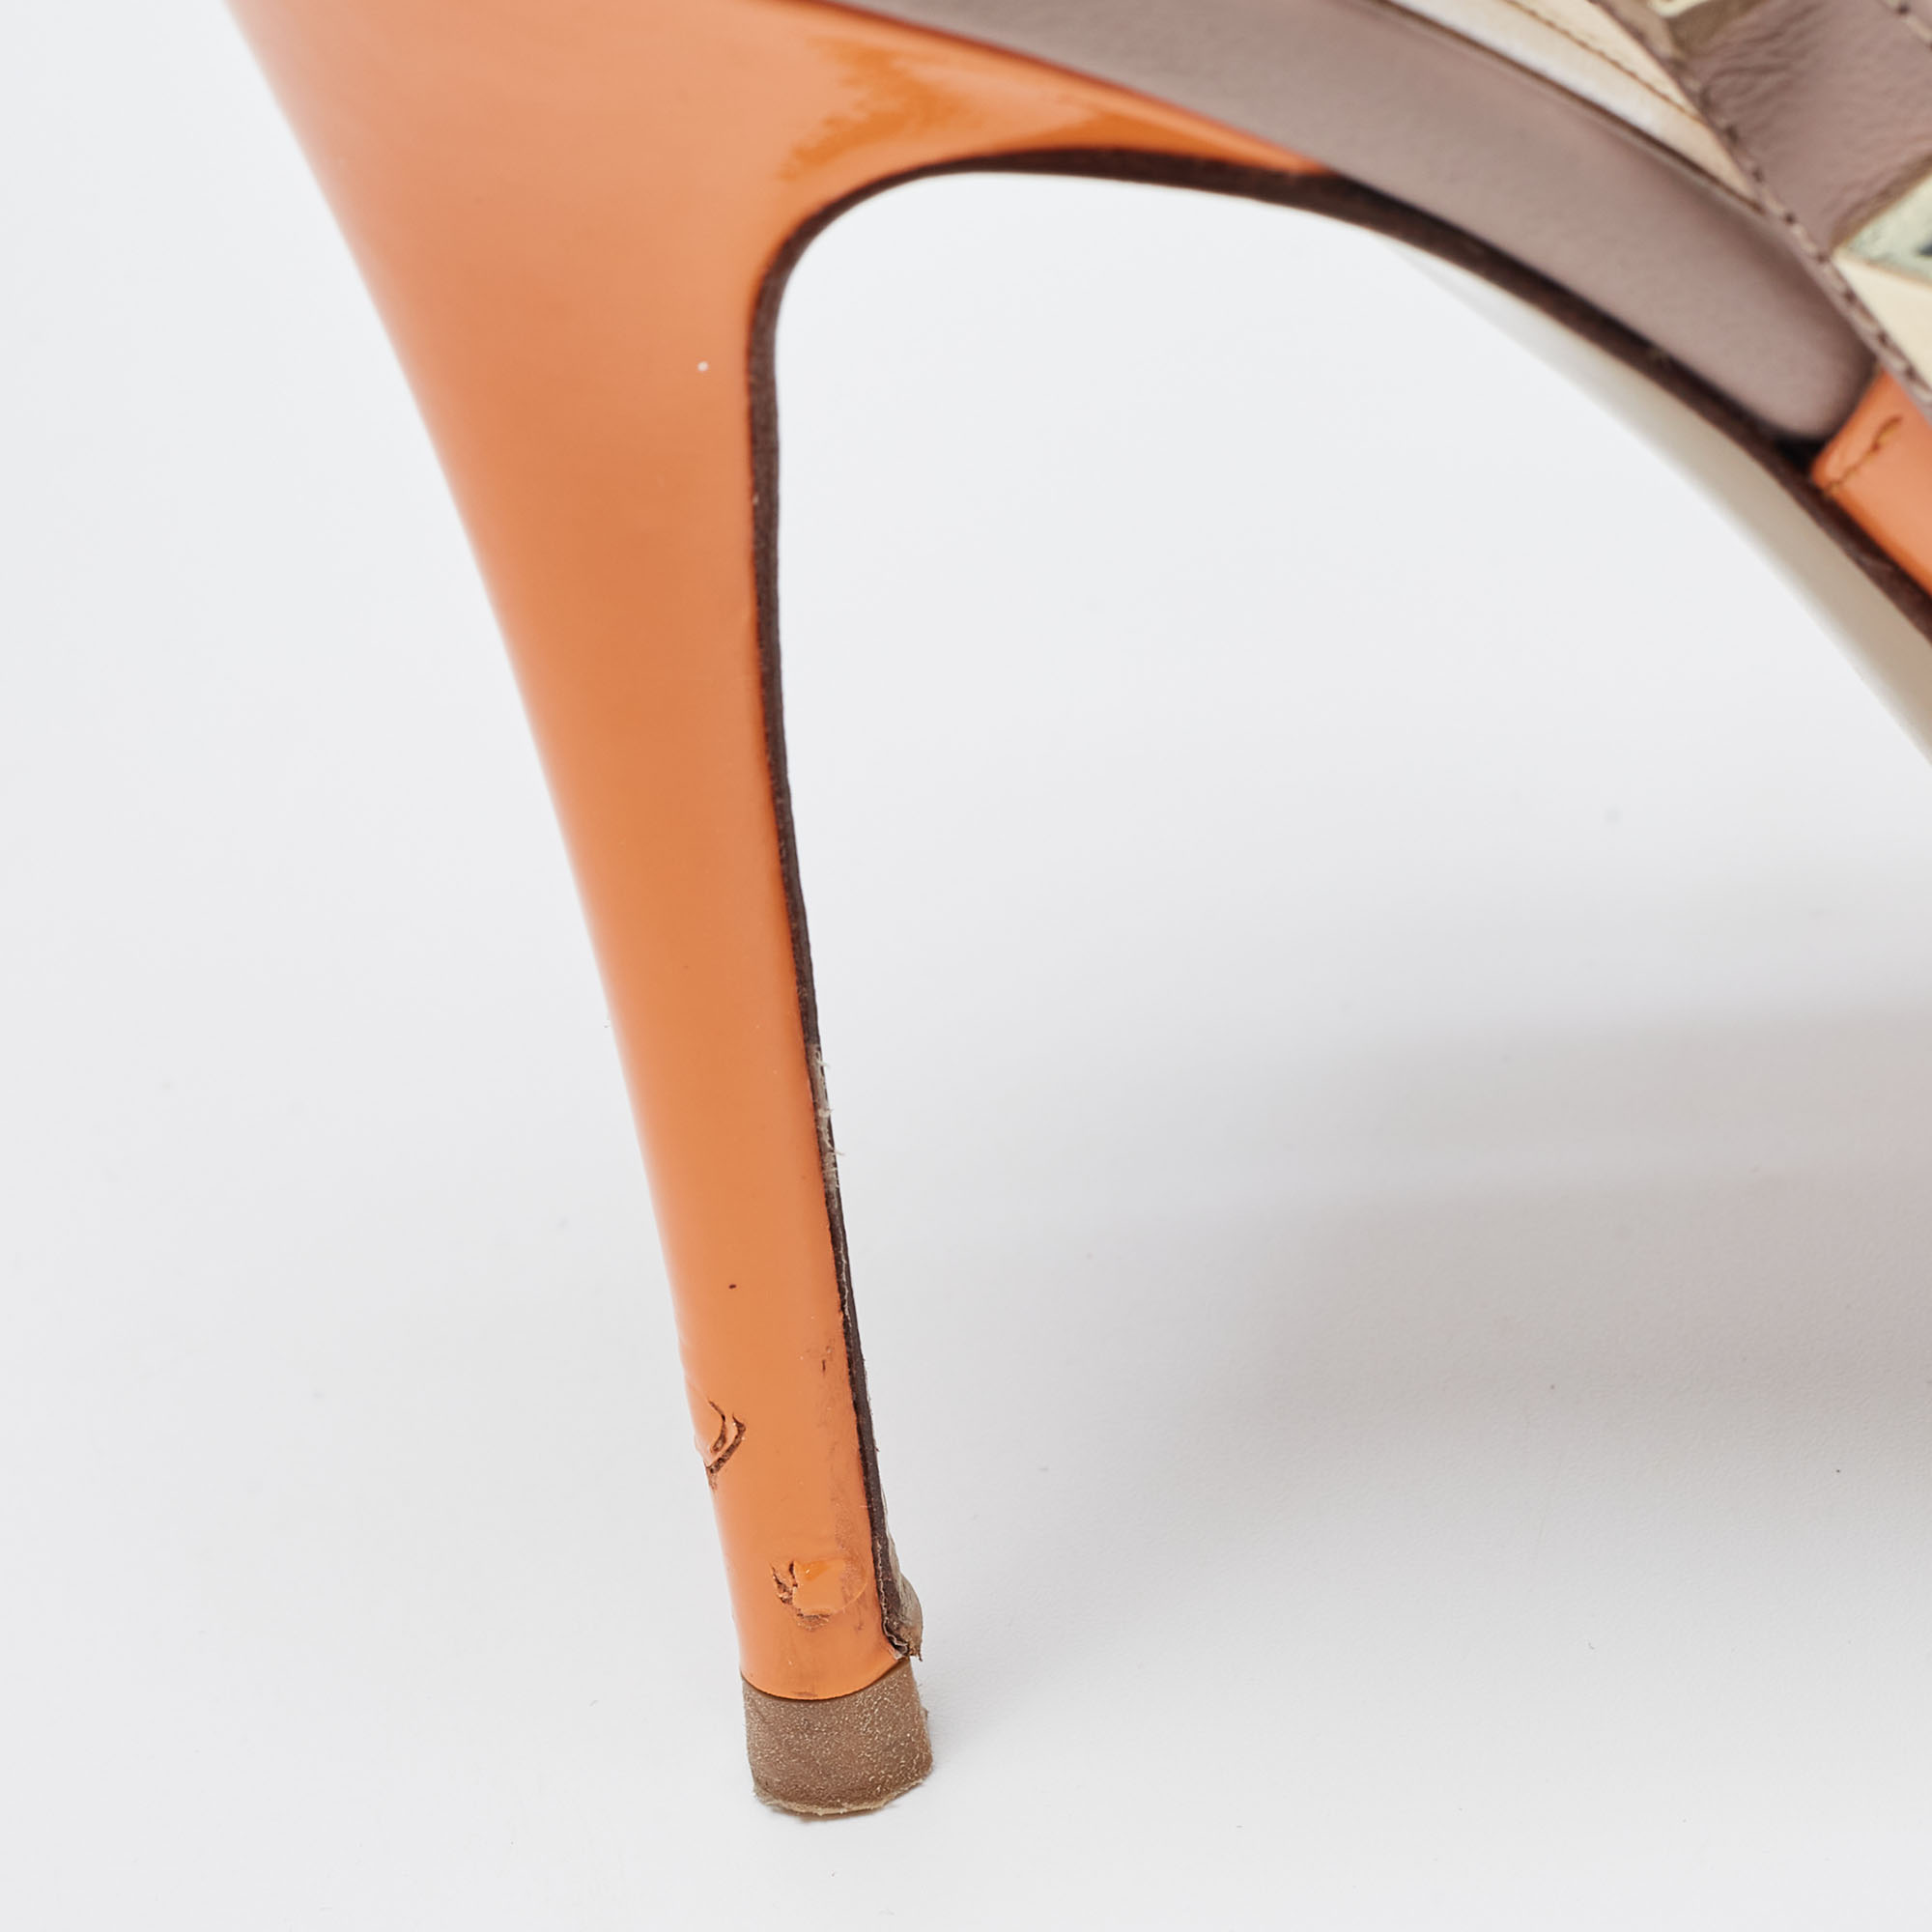 Valentino Orange Patent Leather Rockstud Strappy Pointed Toe Pumps Size 40